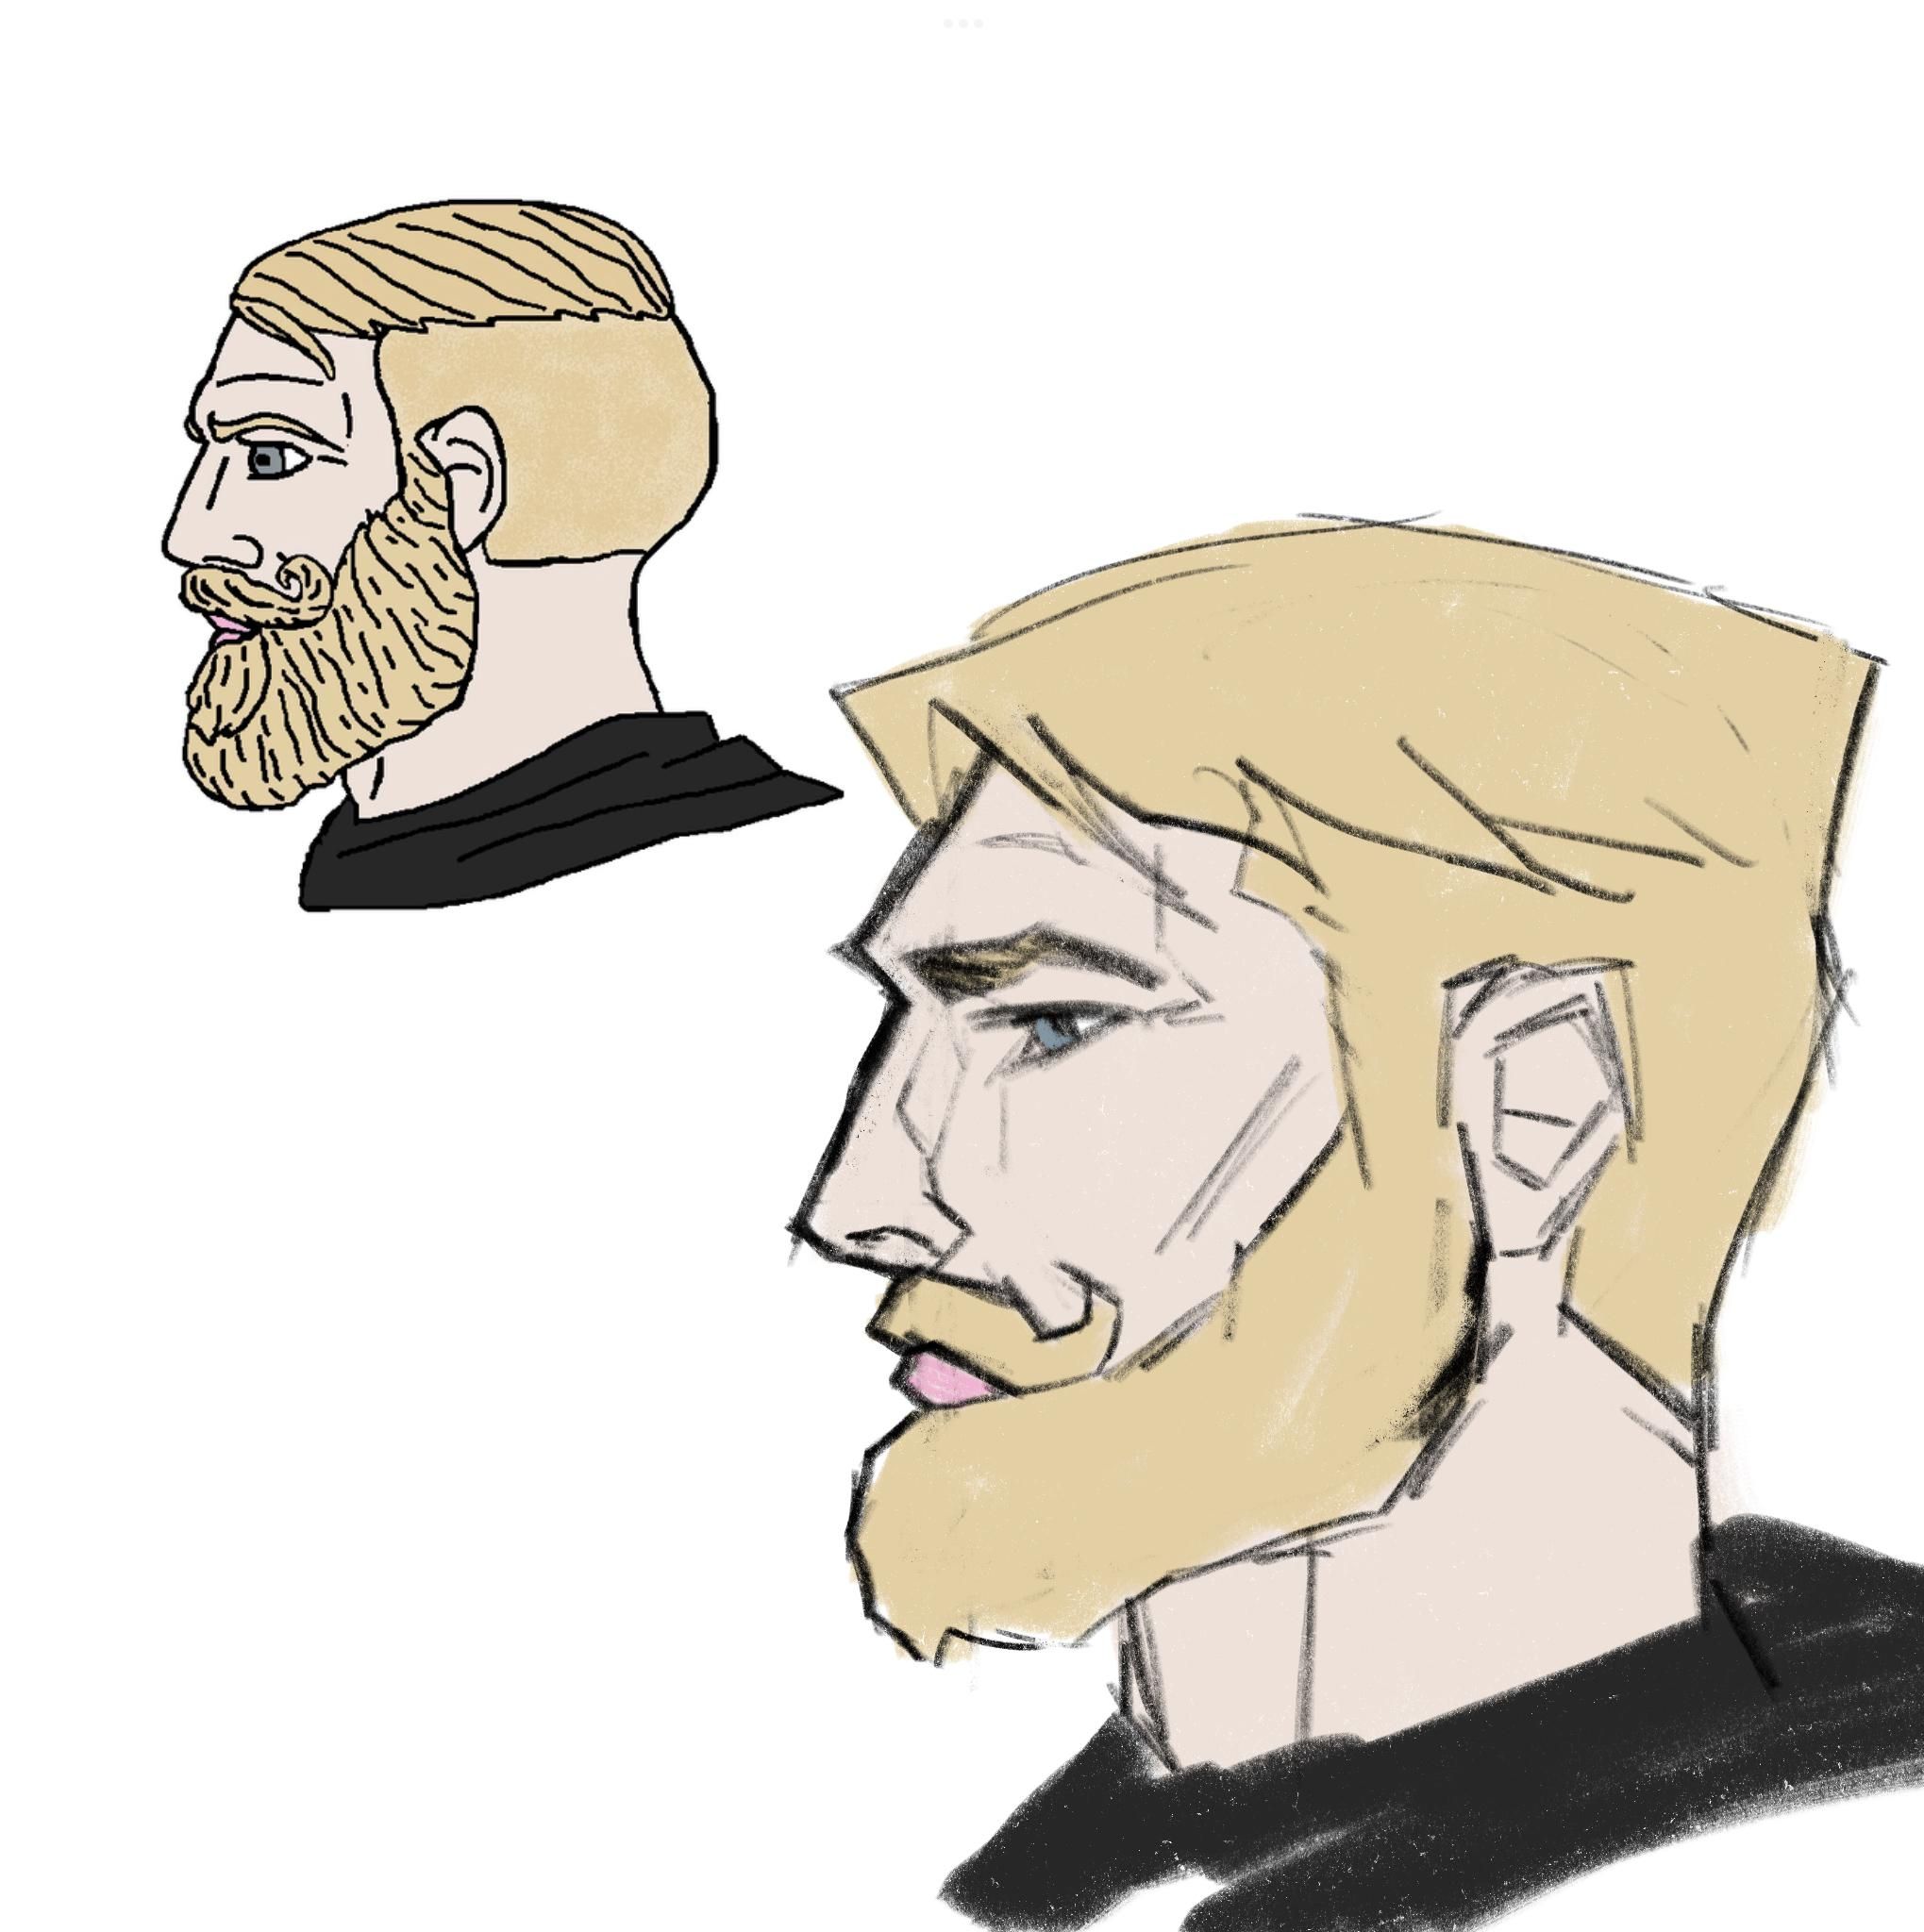 i made chad but a bit more realistic